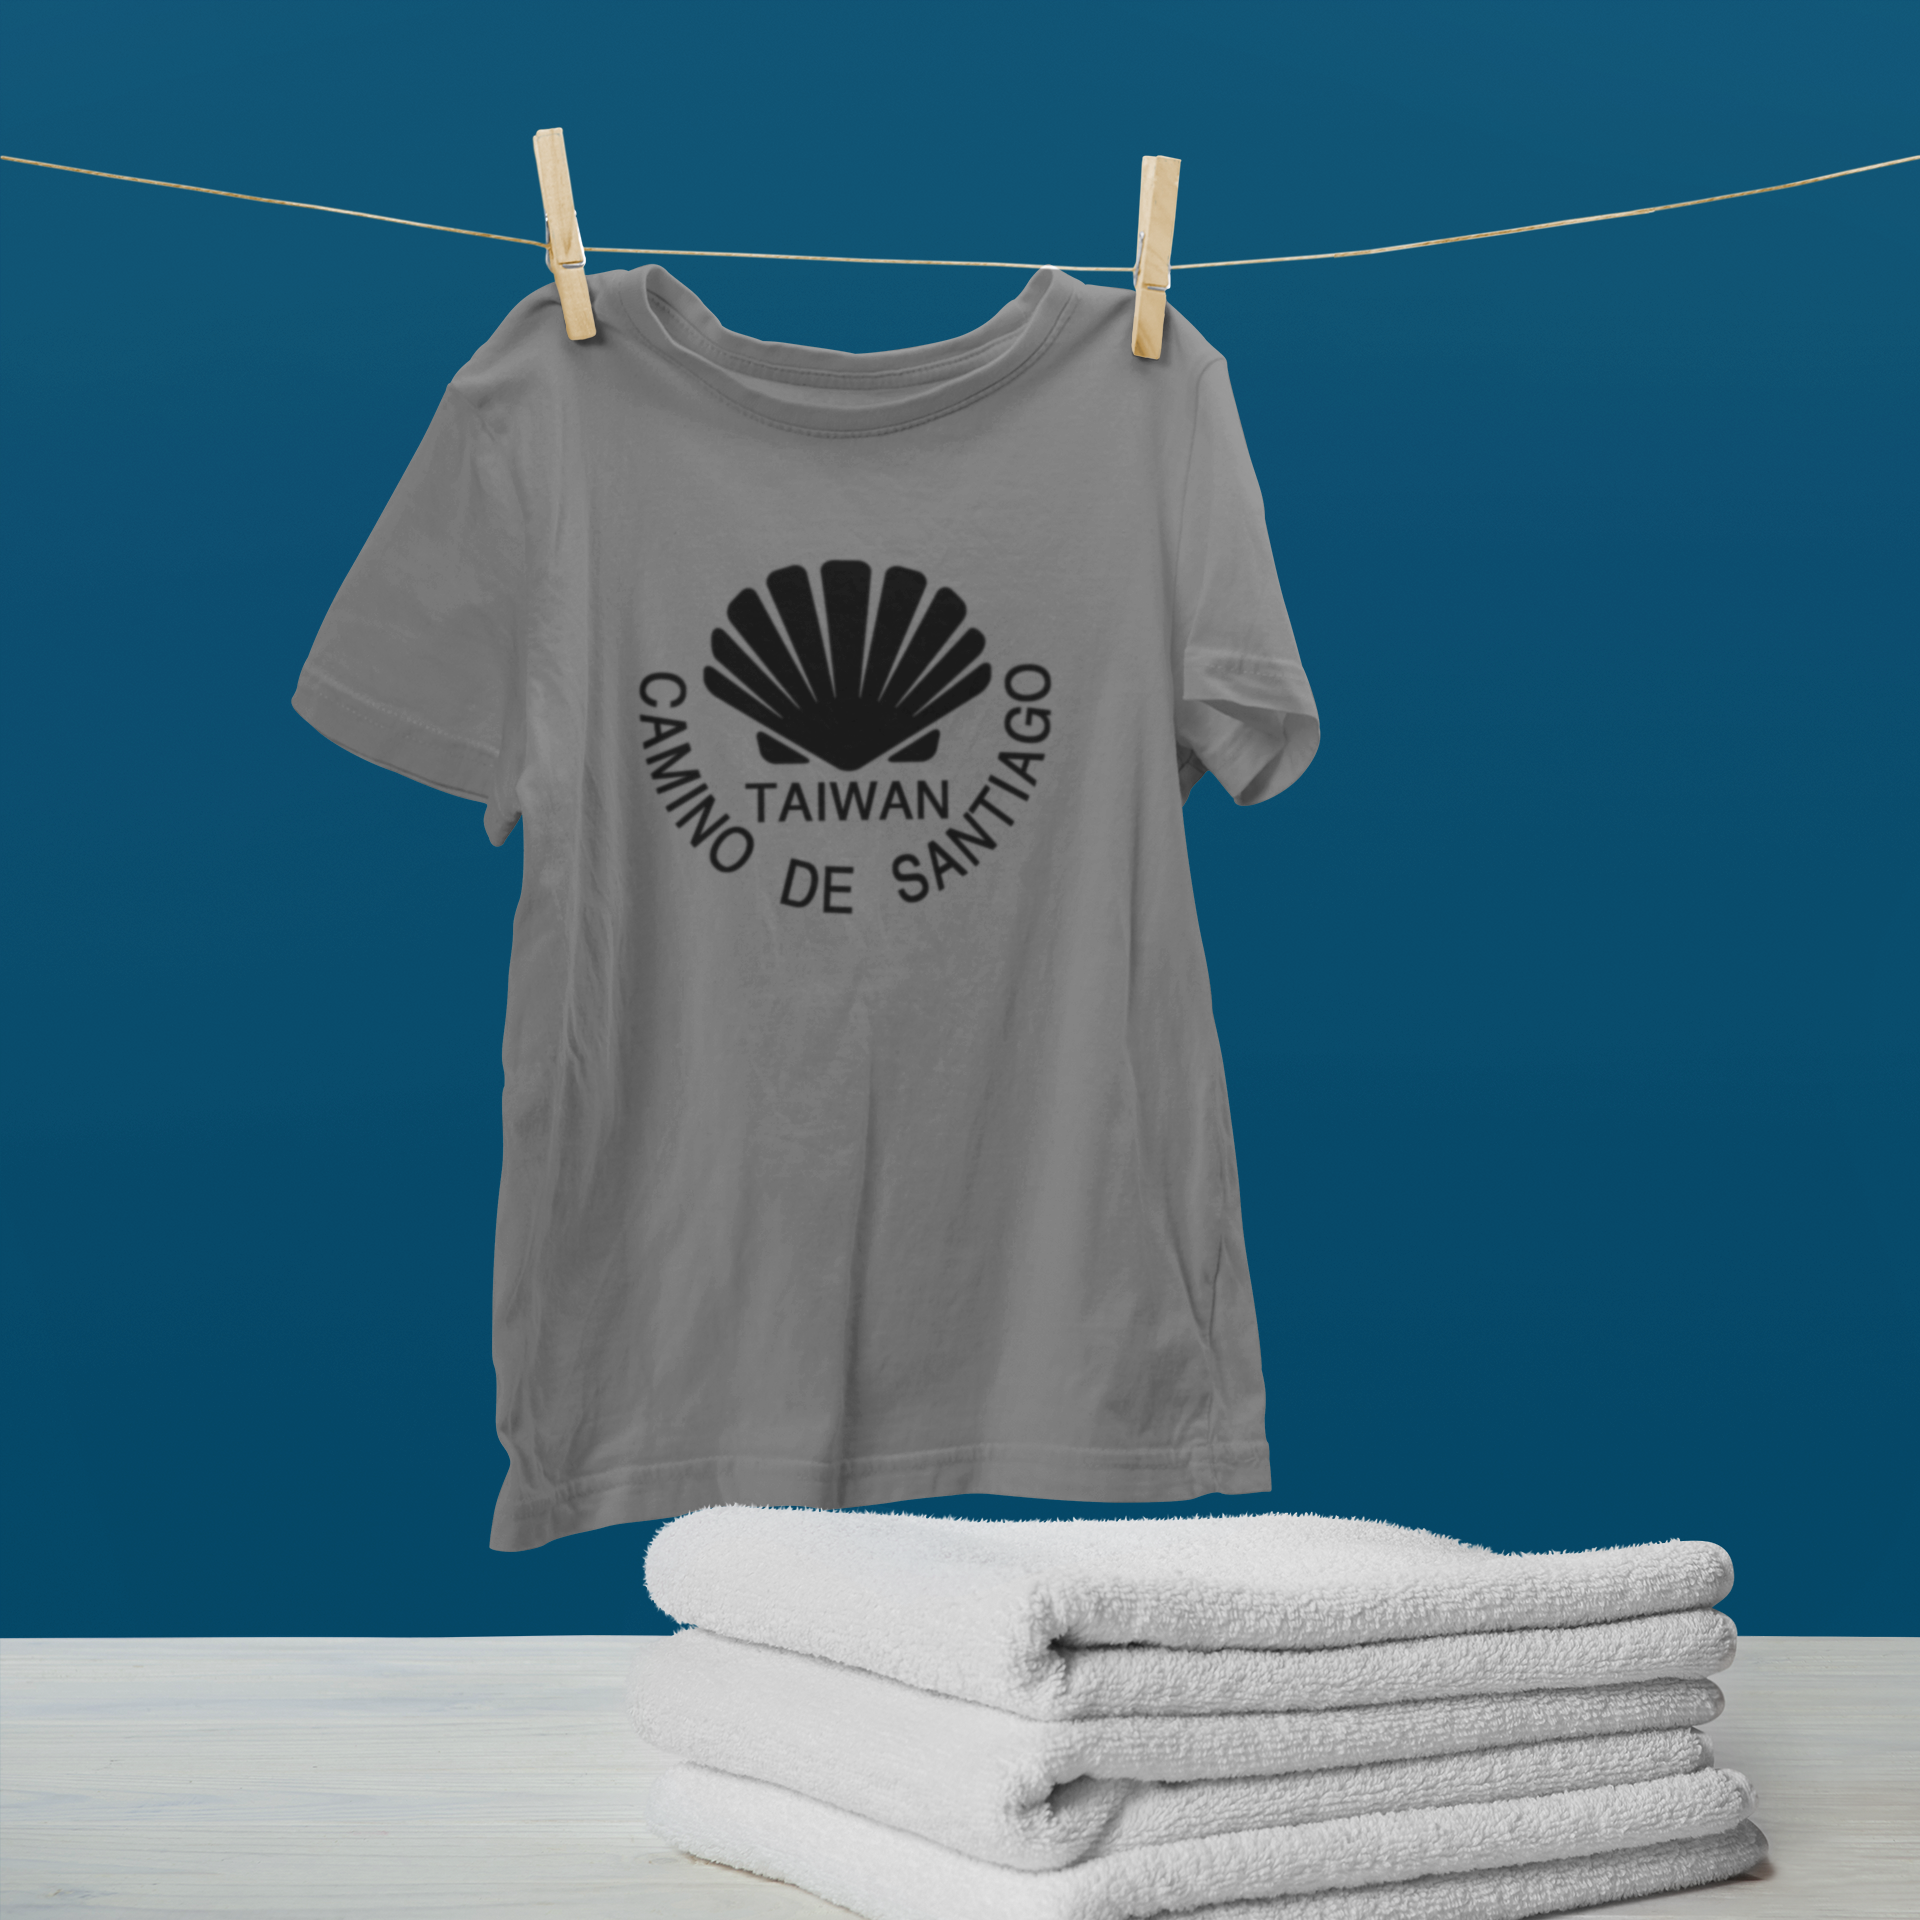 mockup-of-a-hanging-t-shirt-by-some-folded-towels-46150-r-el2 (3)